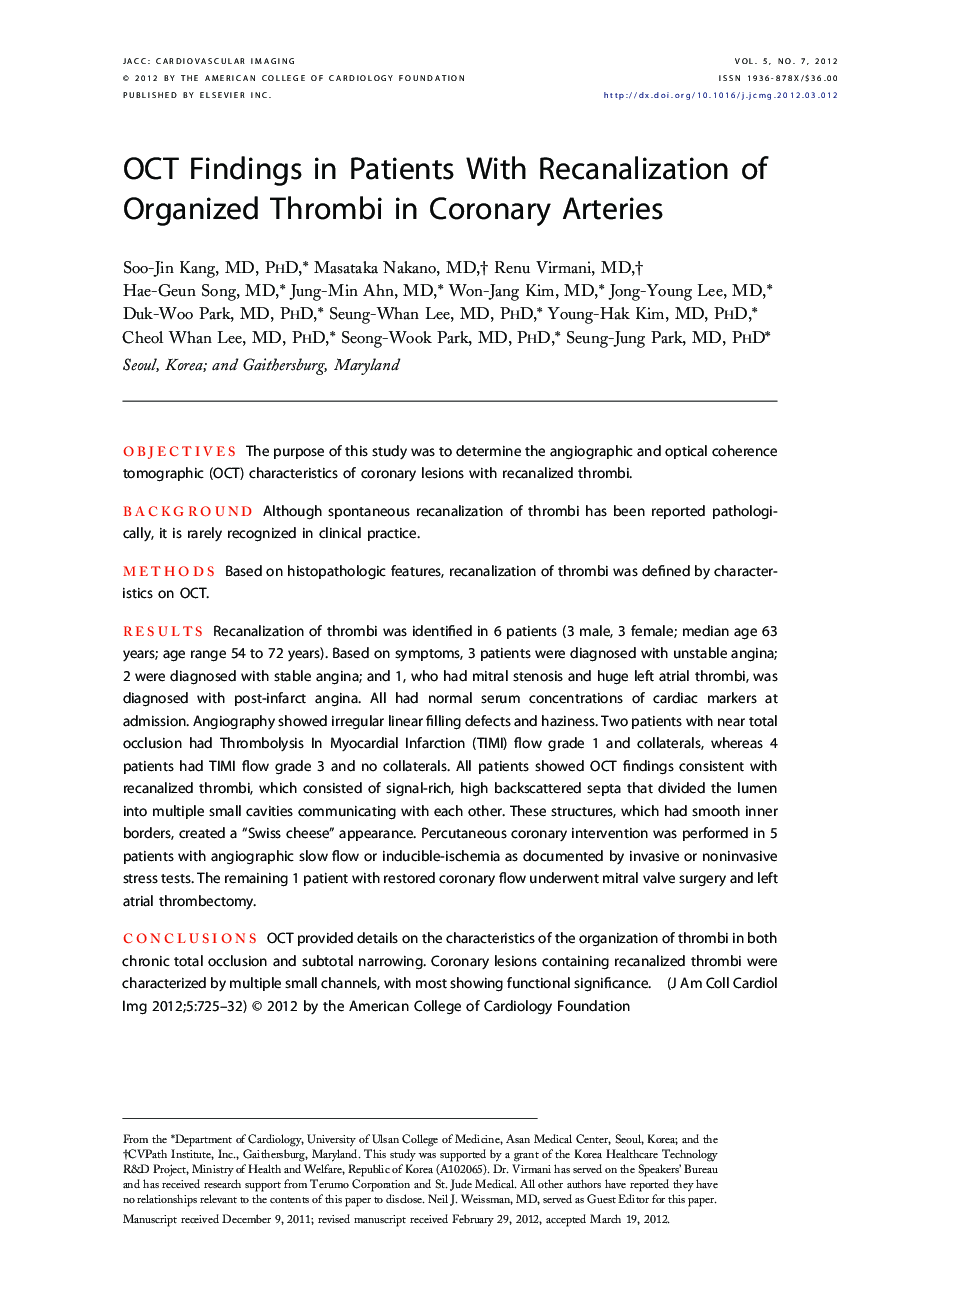 OCT Findings in Patients With Recanalization of Organized Thrombi in Coronary Arteries 